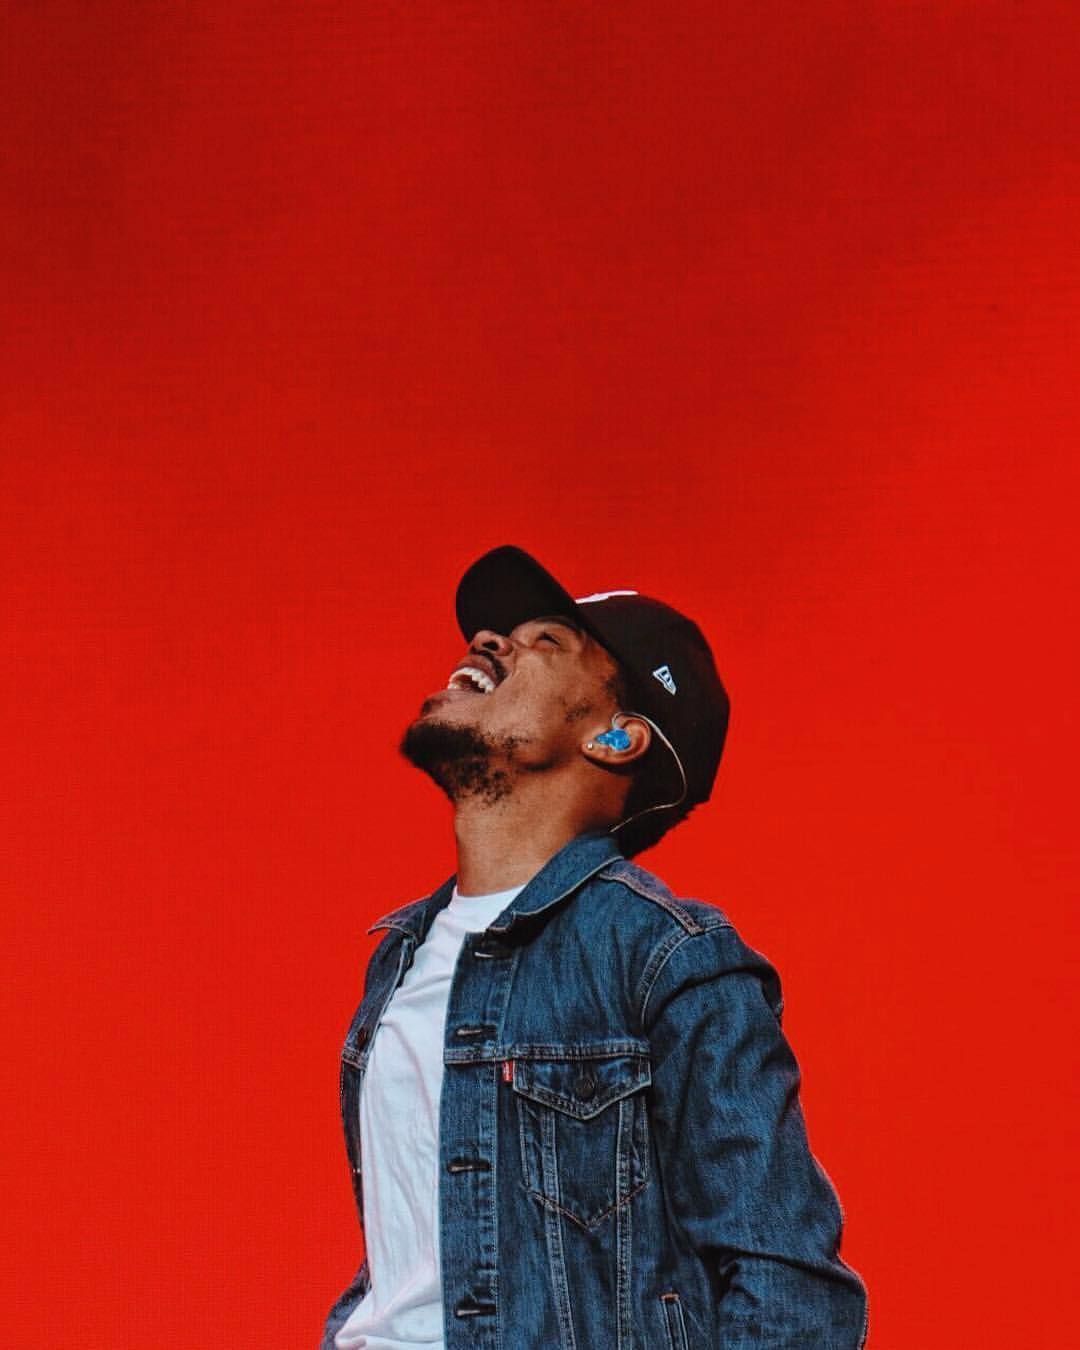 A man wearing jeans and sunglasses is holding his phone - Chance the Rapper